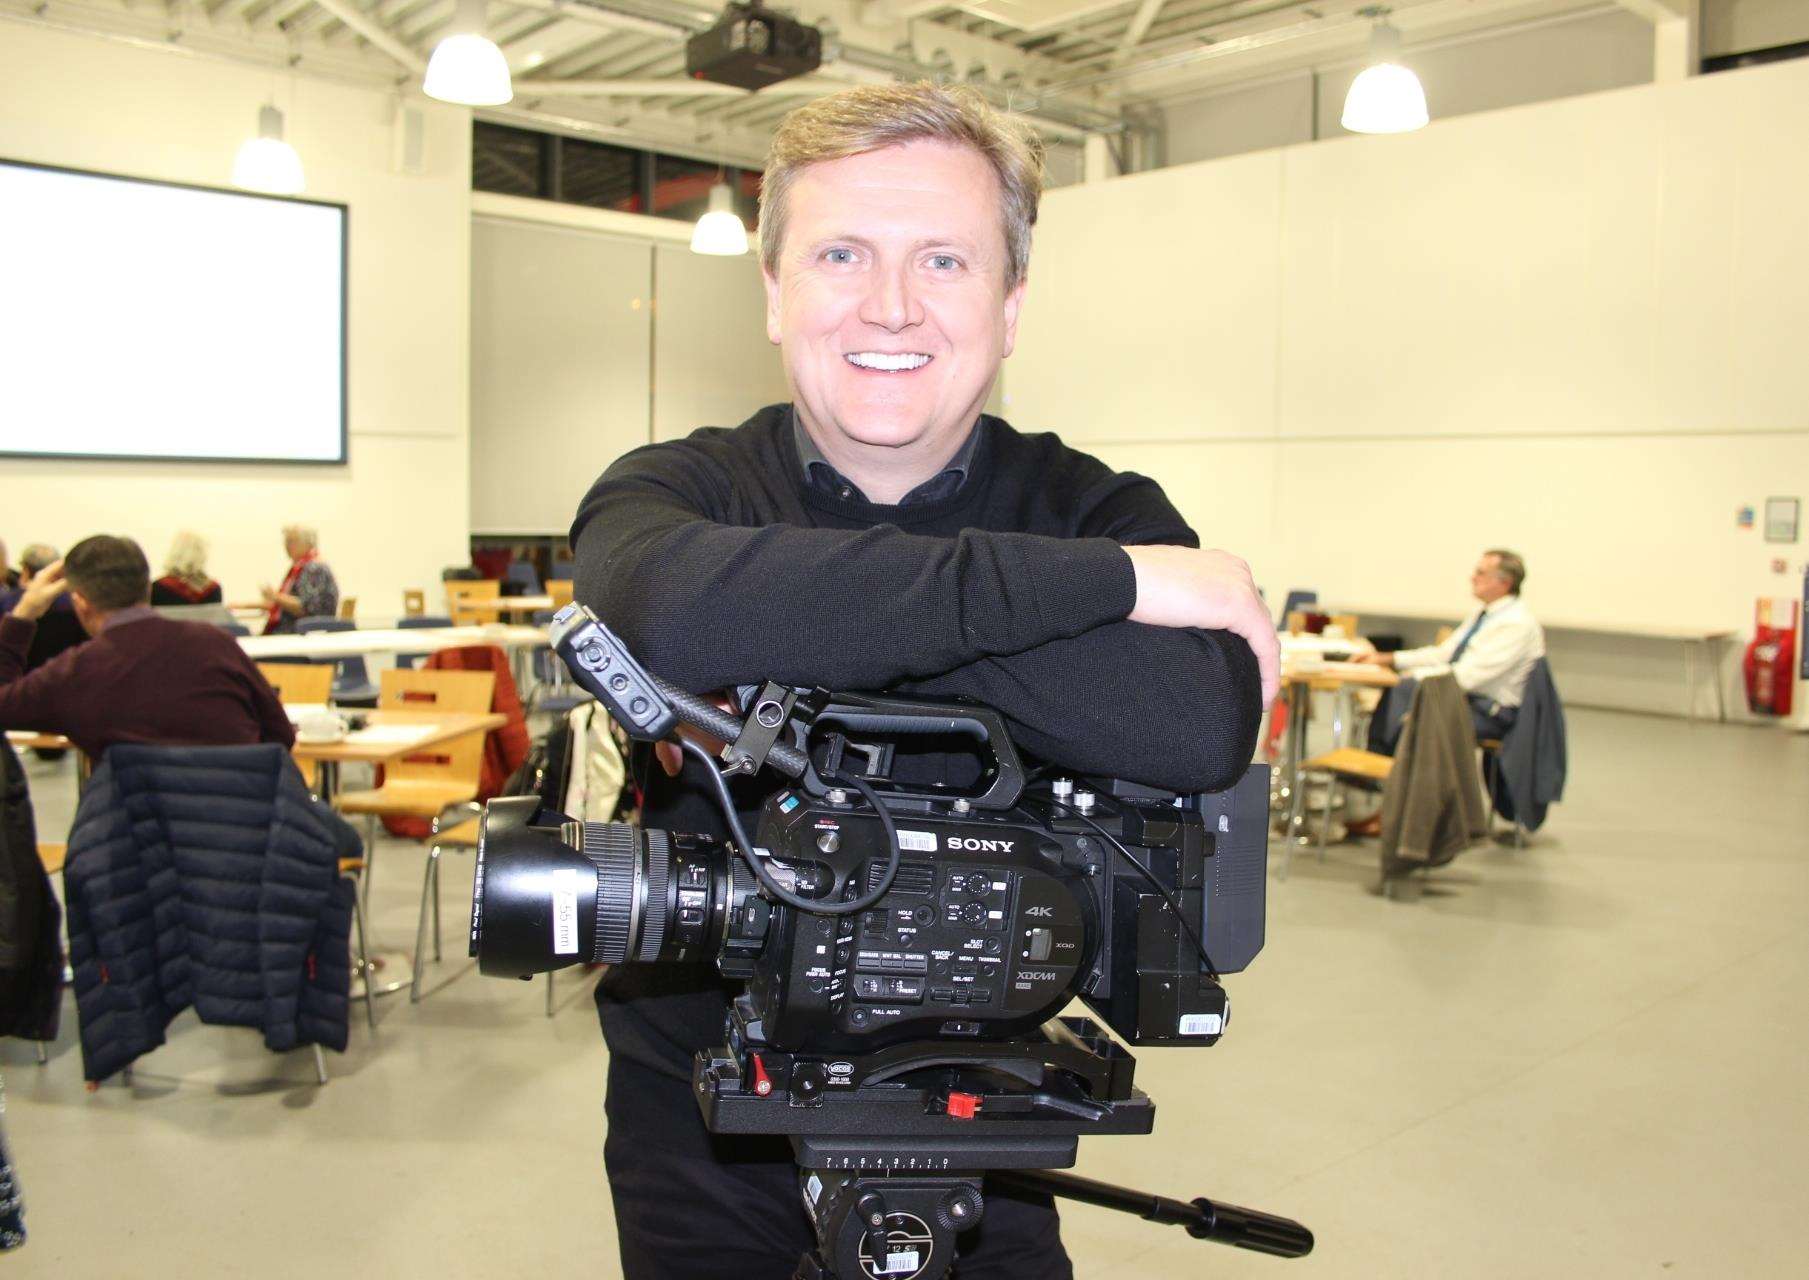 Aled Jones visited Sheppey to record an episode of the BBC TV flagship religious programme Songs of Praise